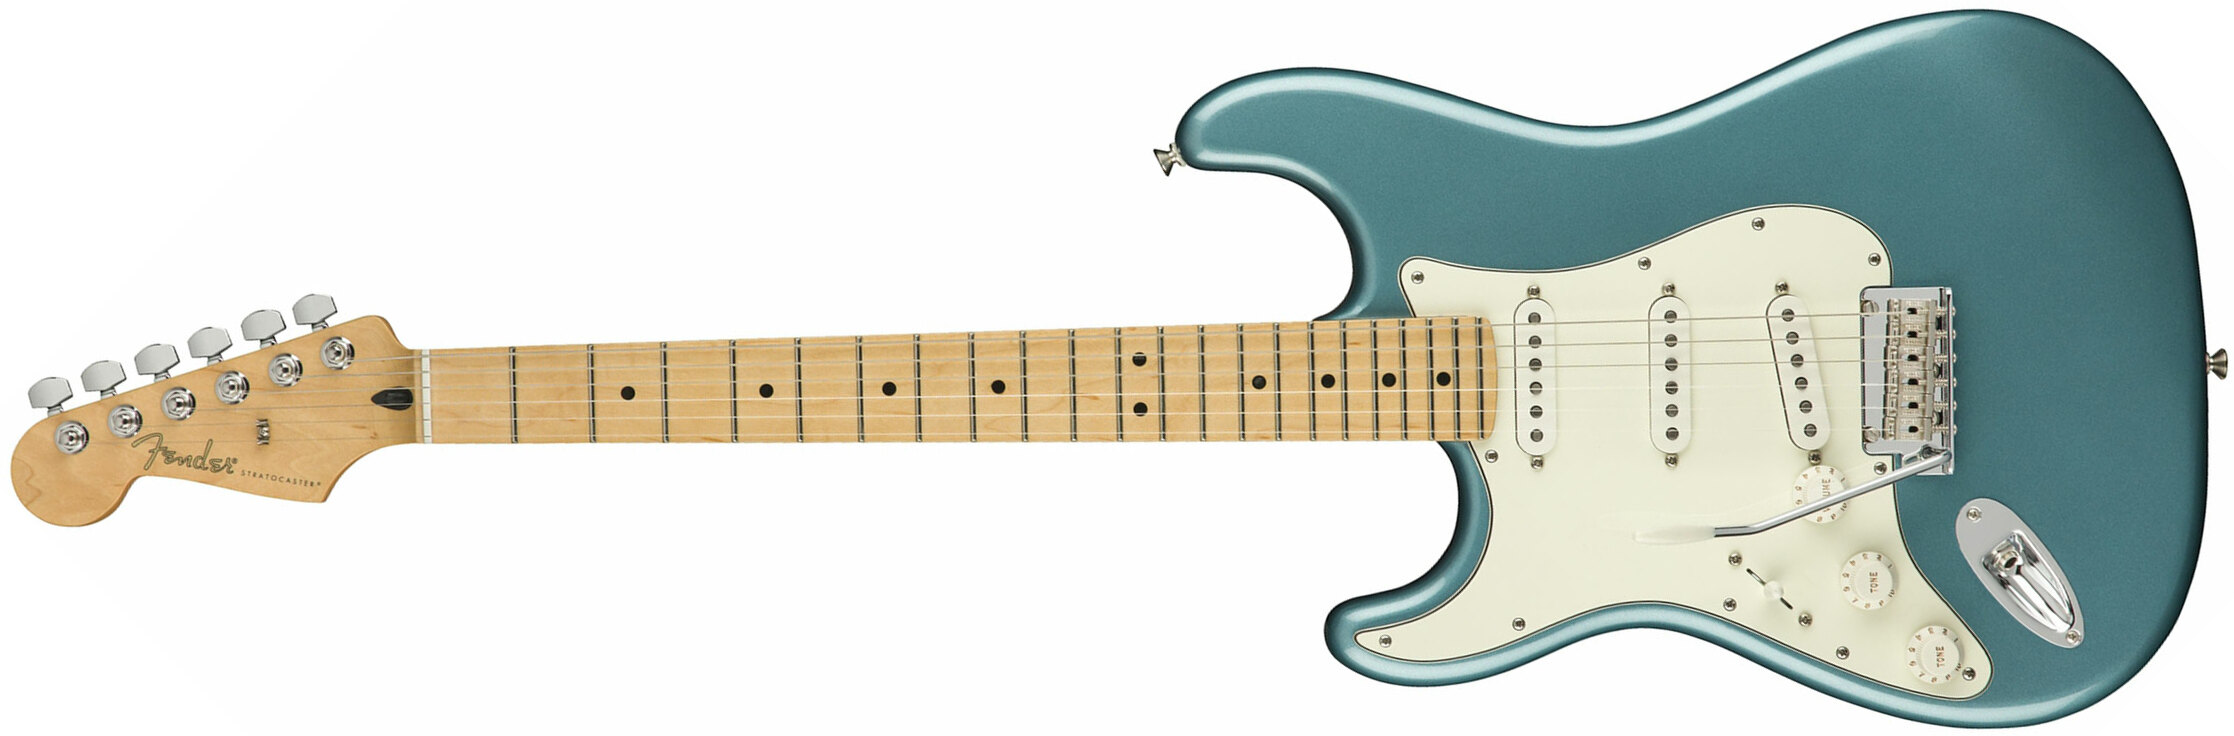 Fender Strat Player Lh Gaucher Mex Sss Mn - Tidepool - Left-handed electric guitar - Main picture